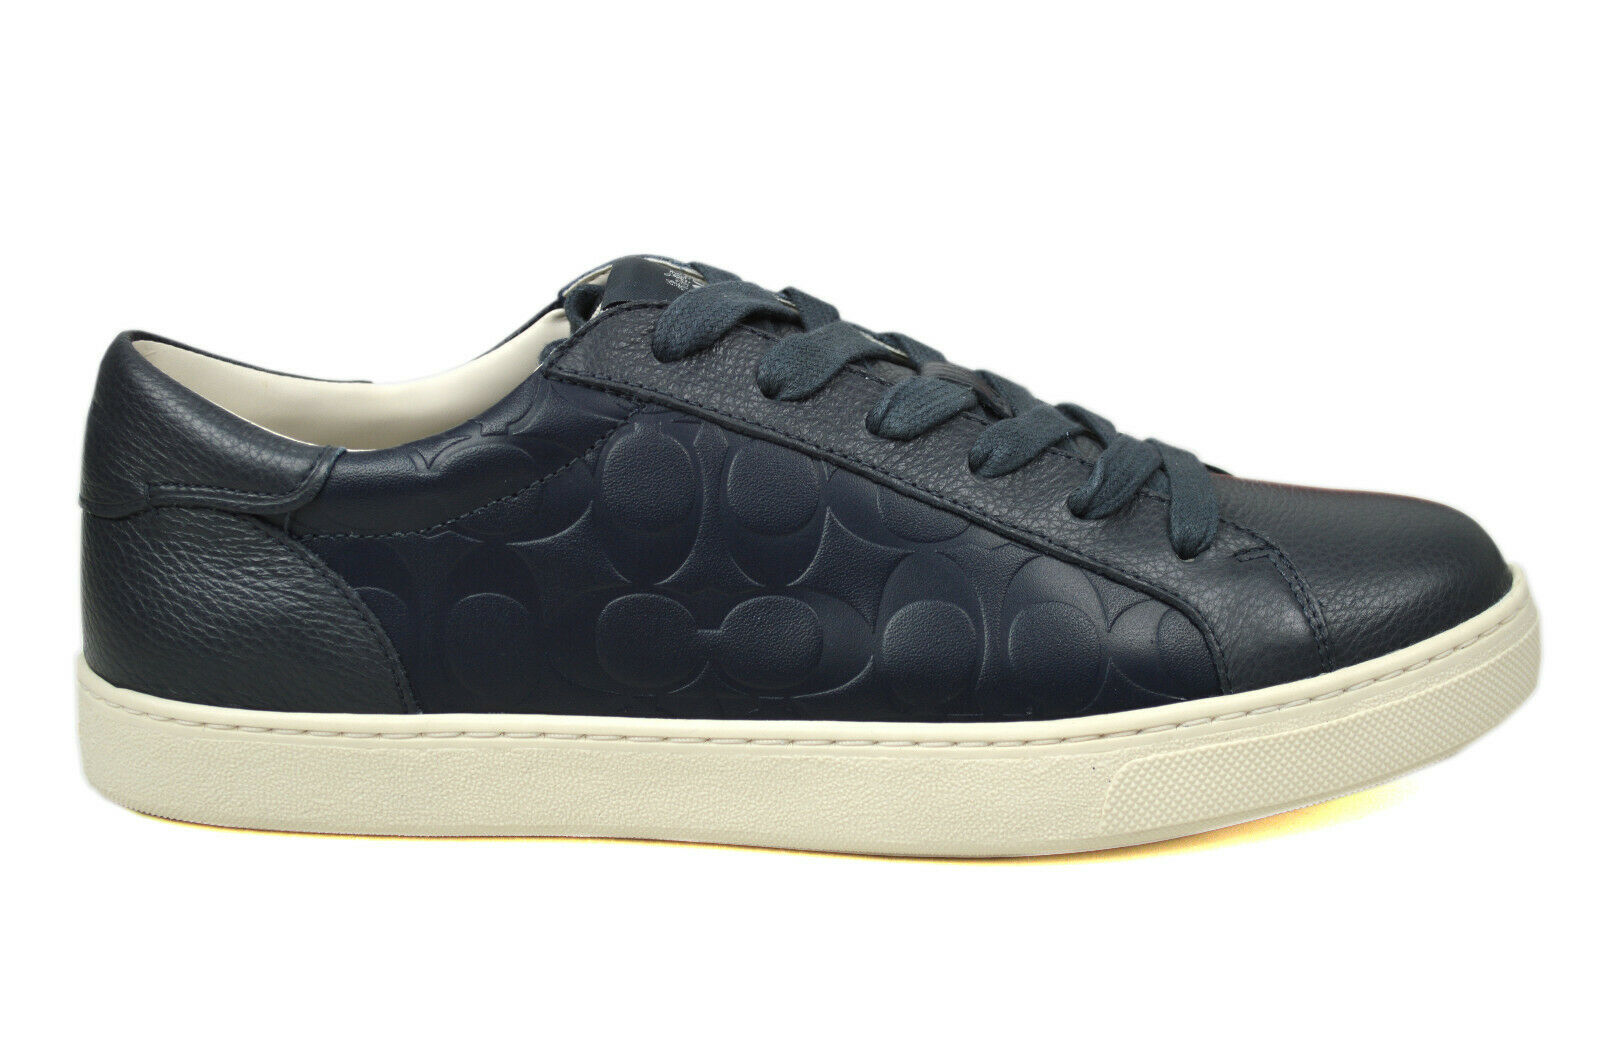 New  Coach Mens C126 Navy Blue Signature Leather Low Top Sneakers Sz 9.5 D 8994-3 - image 2 of 4